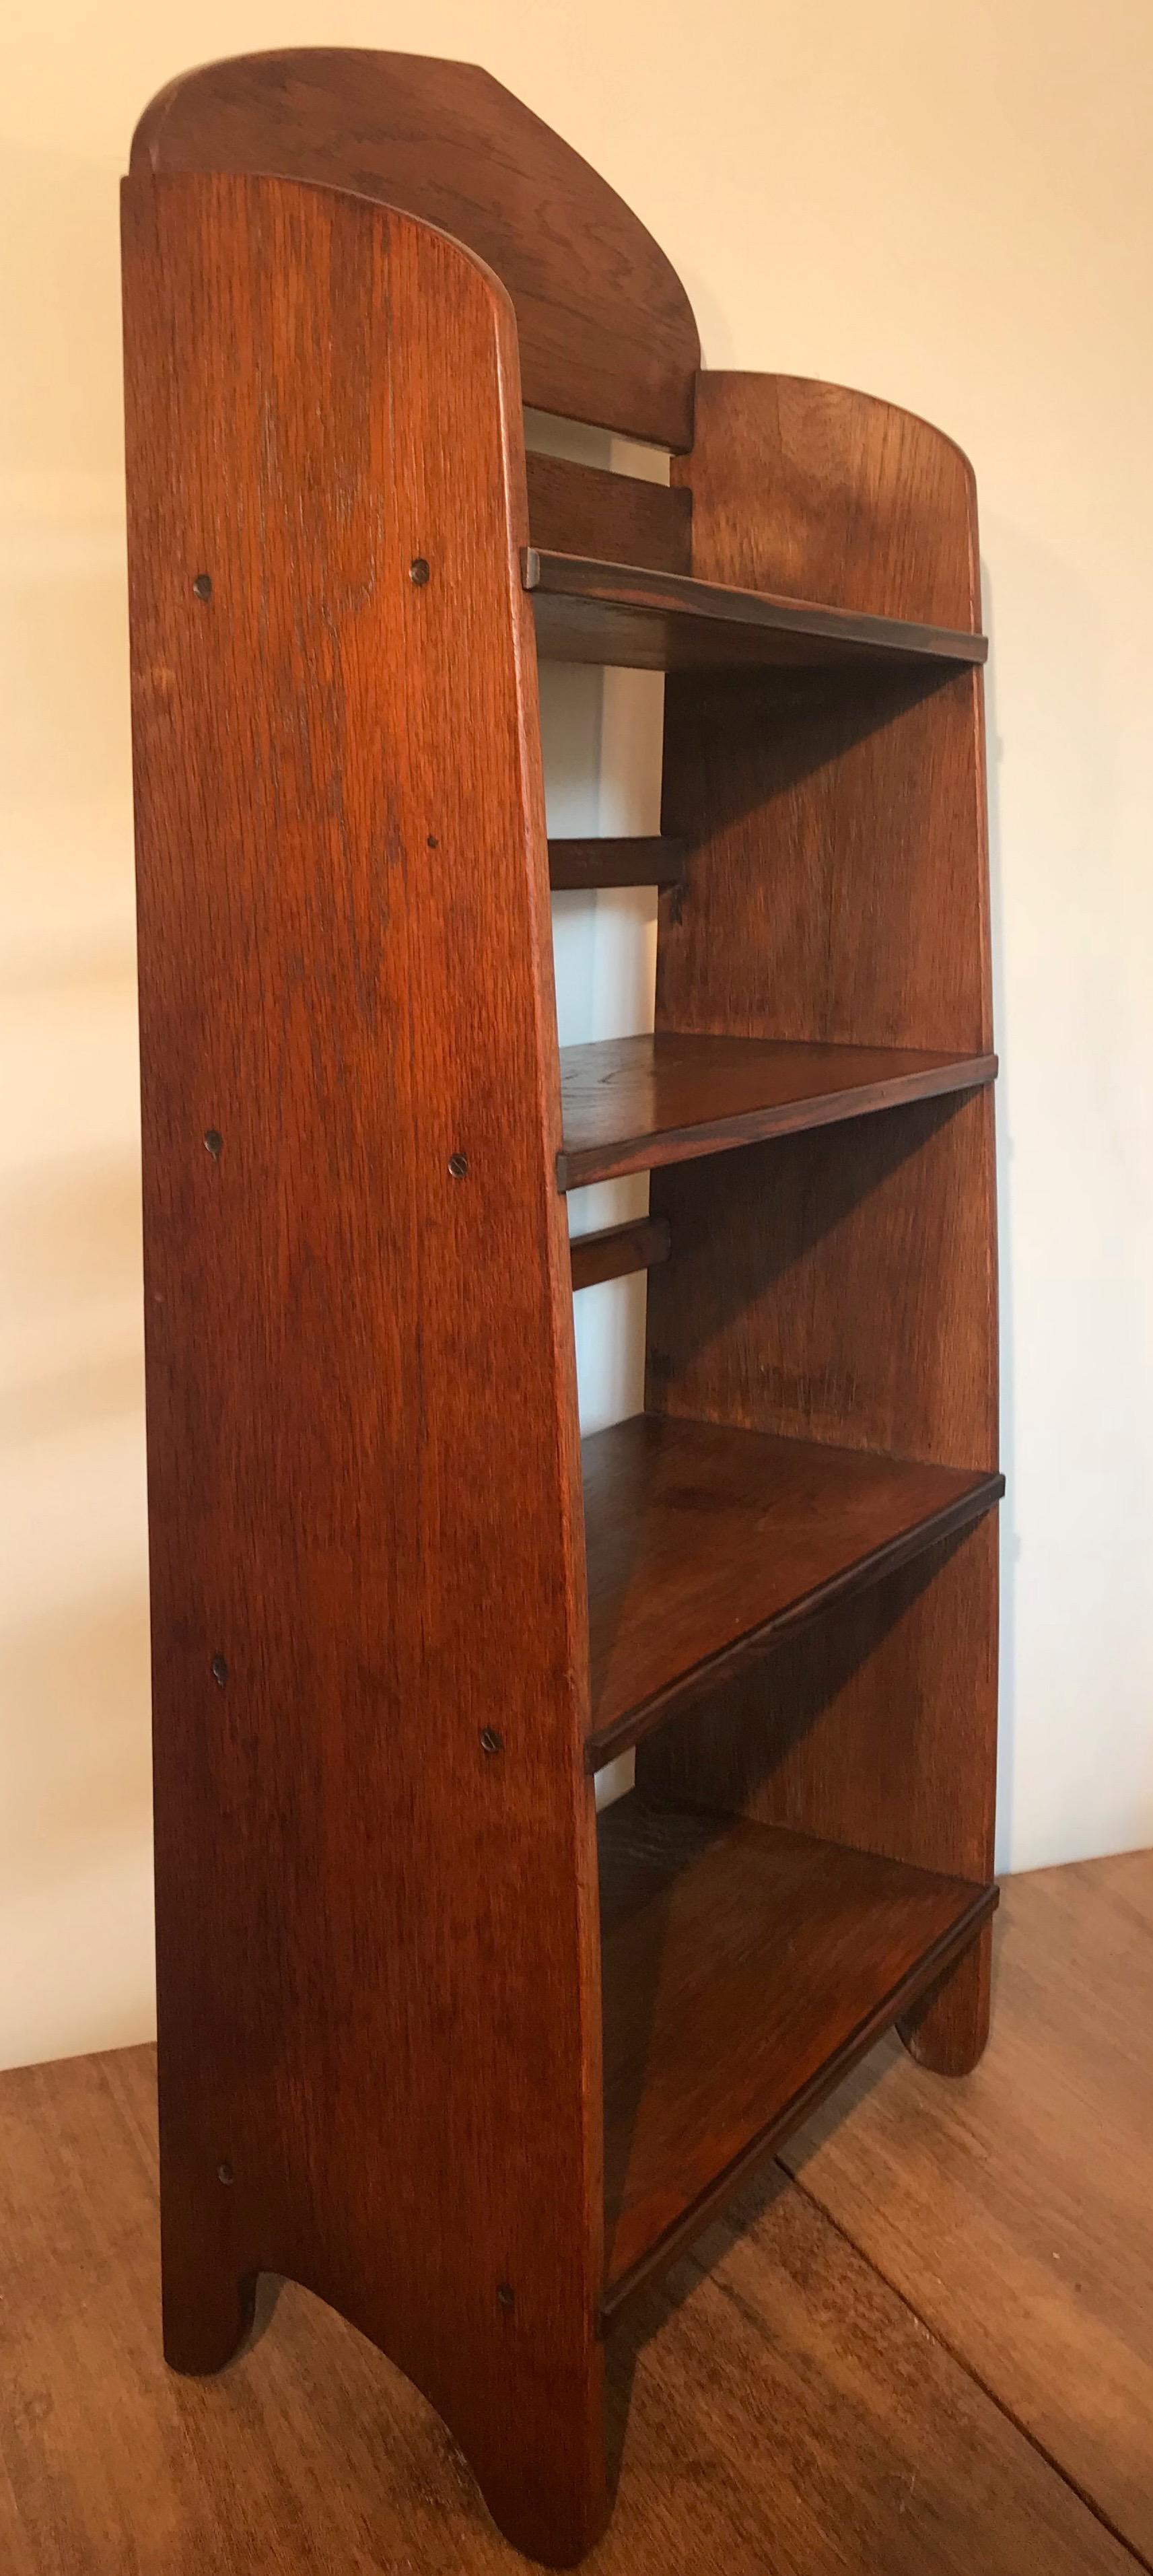 For those who are looking for a small, practical and great quality bookcase.

This beautifully designed and perfectly crafted, small and open bookcase dates from the turn of the century and it can be used for all kinds of purposes. The combination